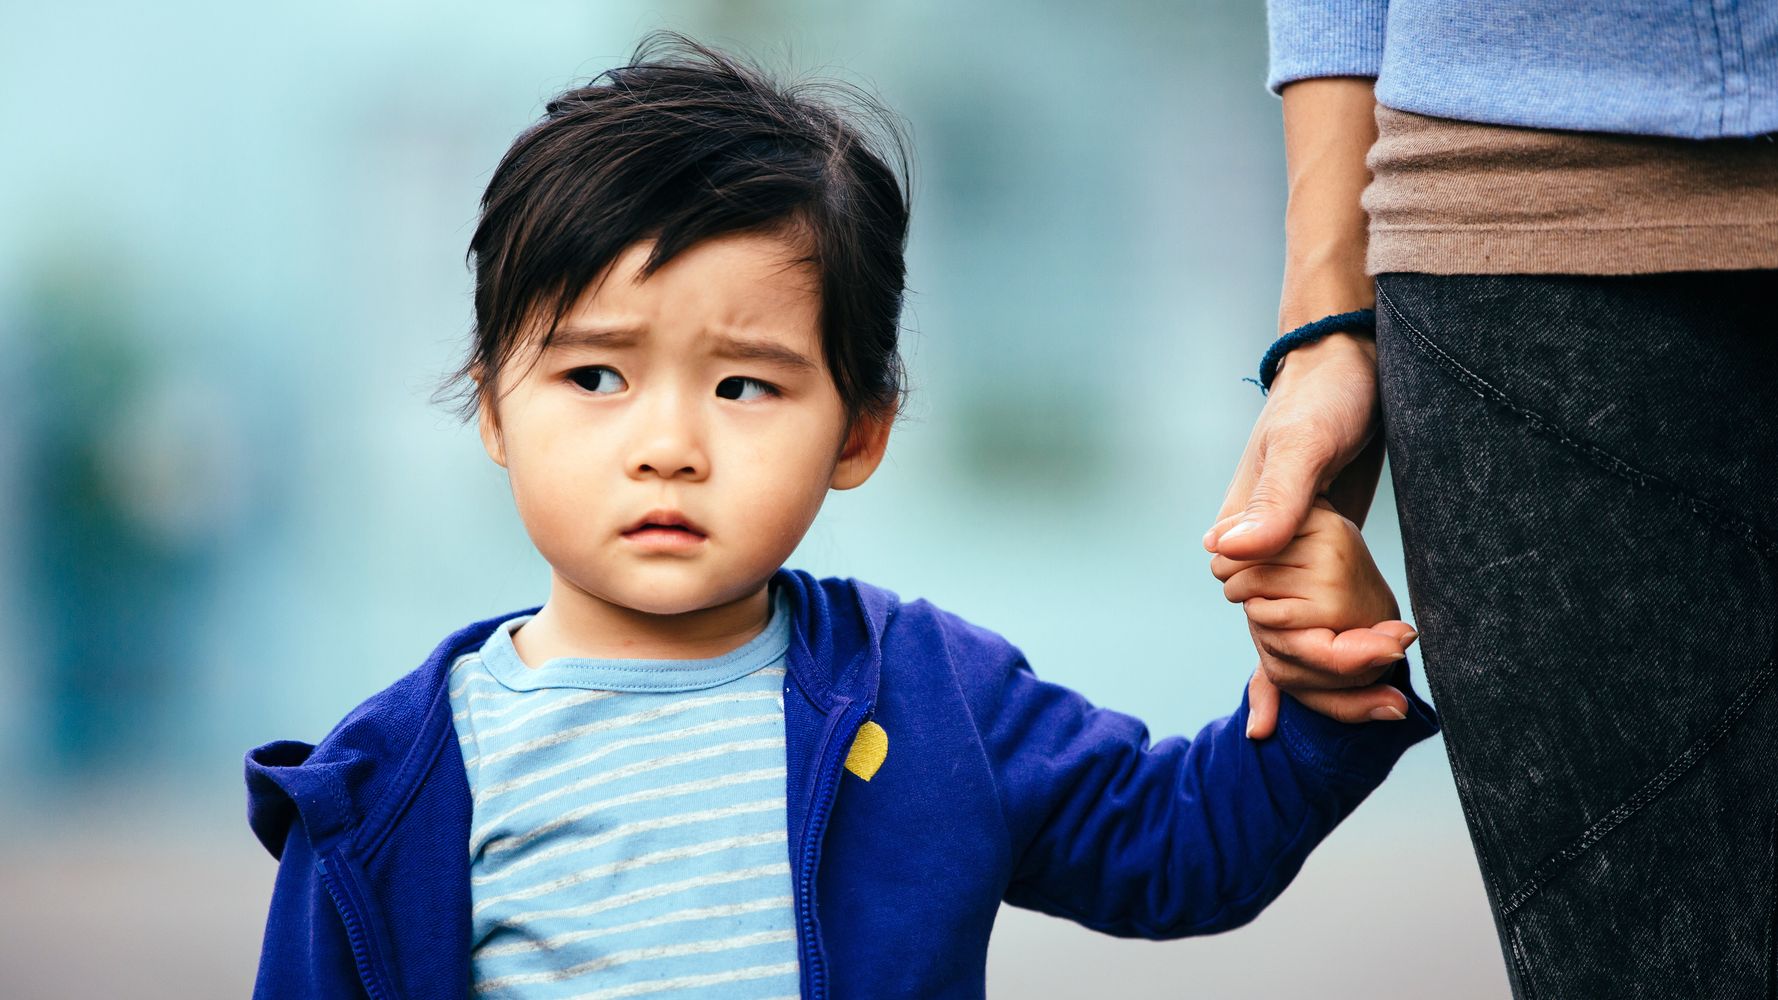 How to Talk to Kids About Anti-Asian Violence And Racism